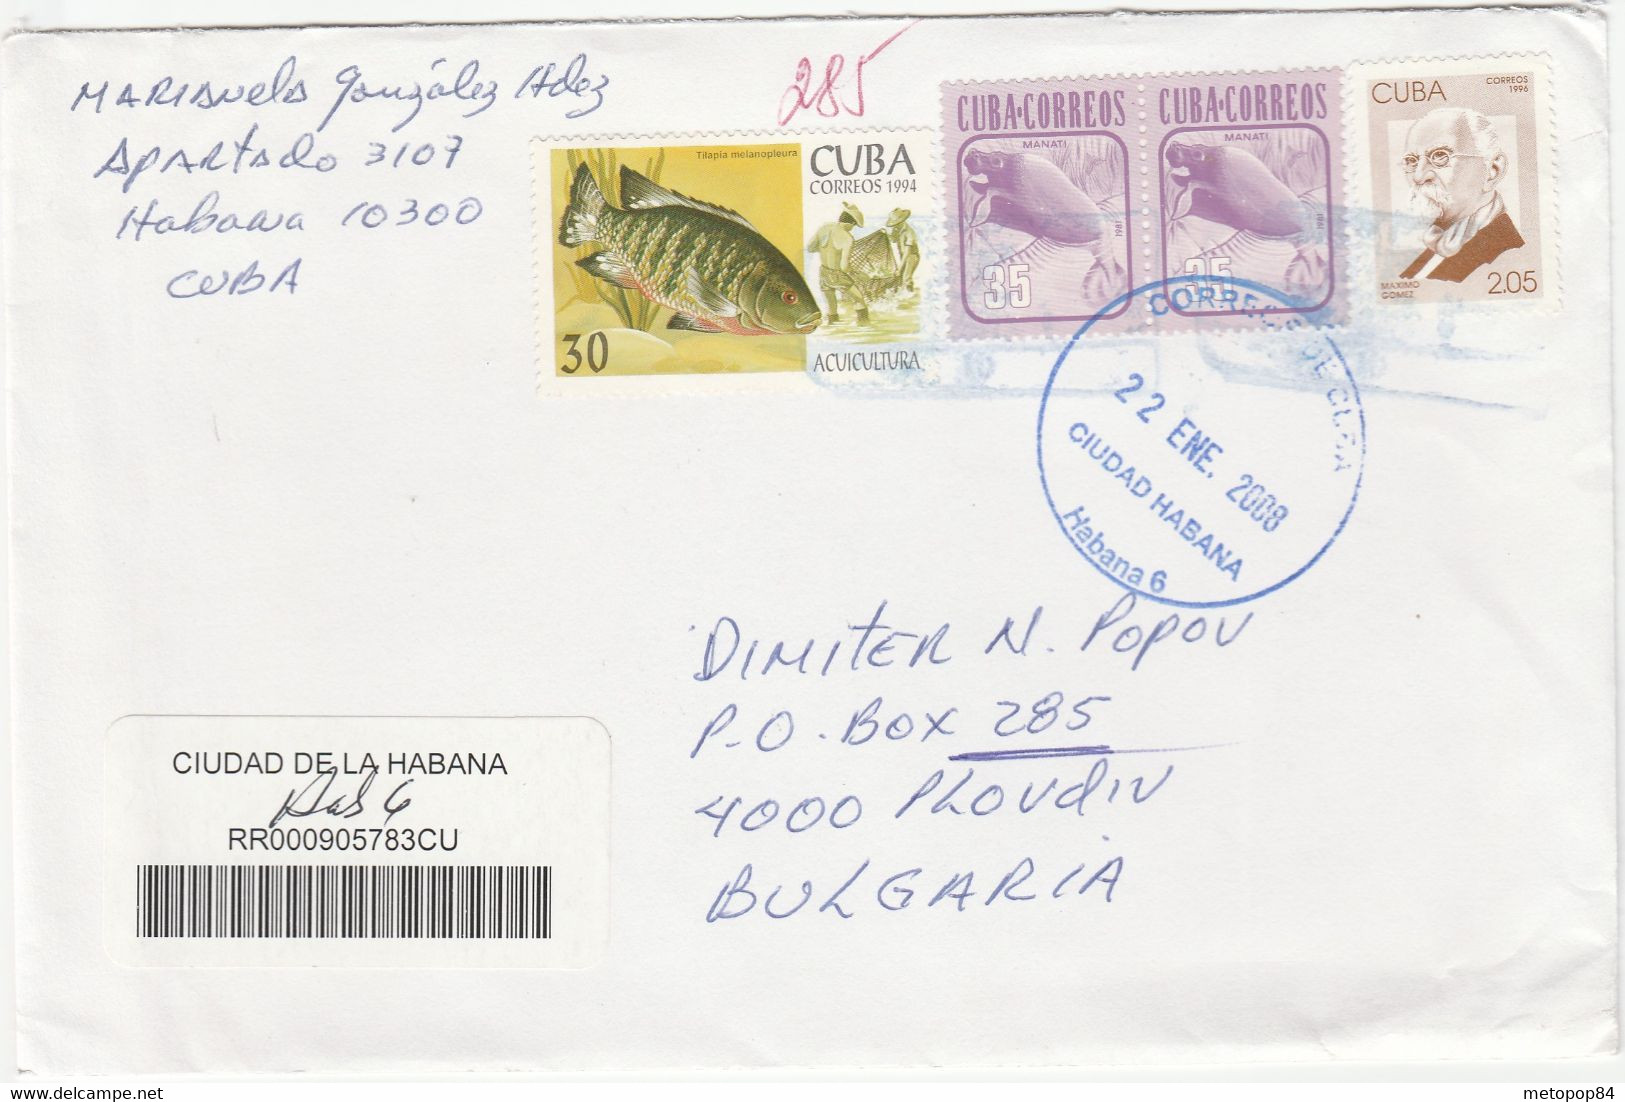 Cuba Postally Used Cover - Covers & Documents